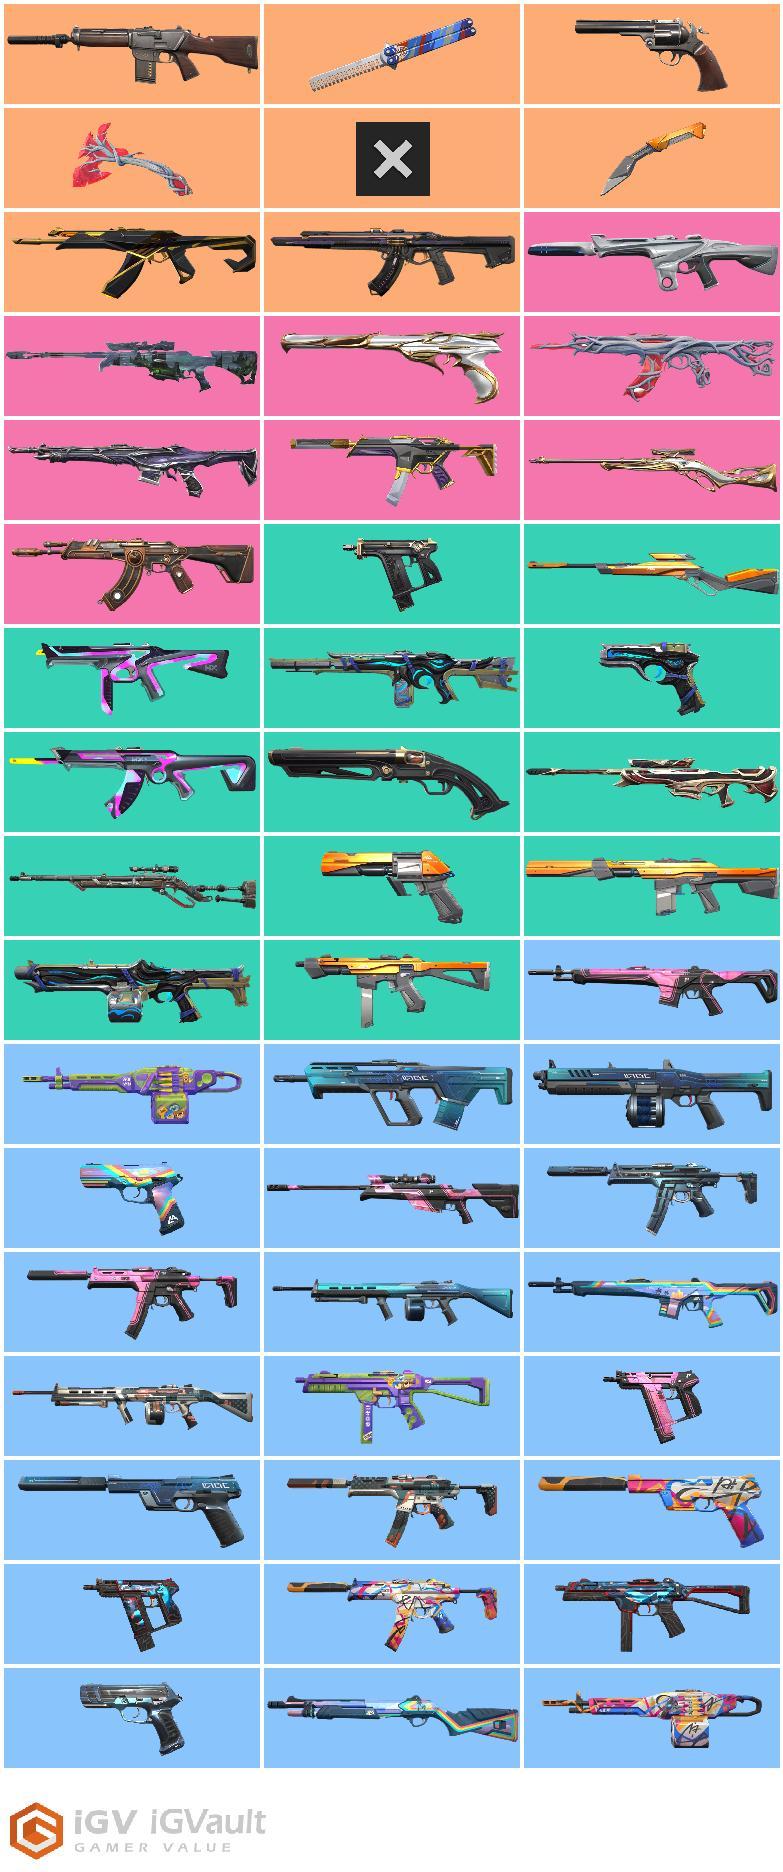 EUROPE.51 SKINS.Neo Frontier Phantom+Chaos Vandal für 4 RARE KNIVES (Gaia's Wrath) / MAIL (FULL ACCESS) / LUX Quality